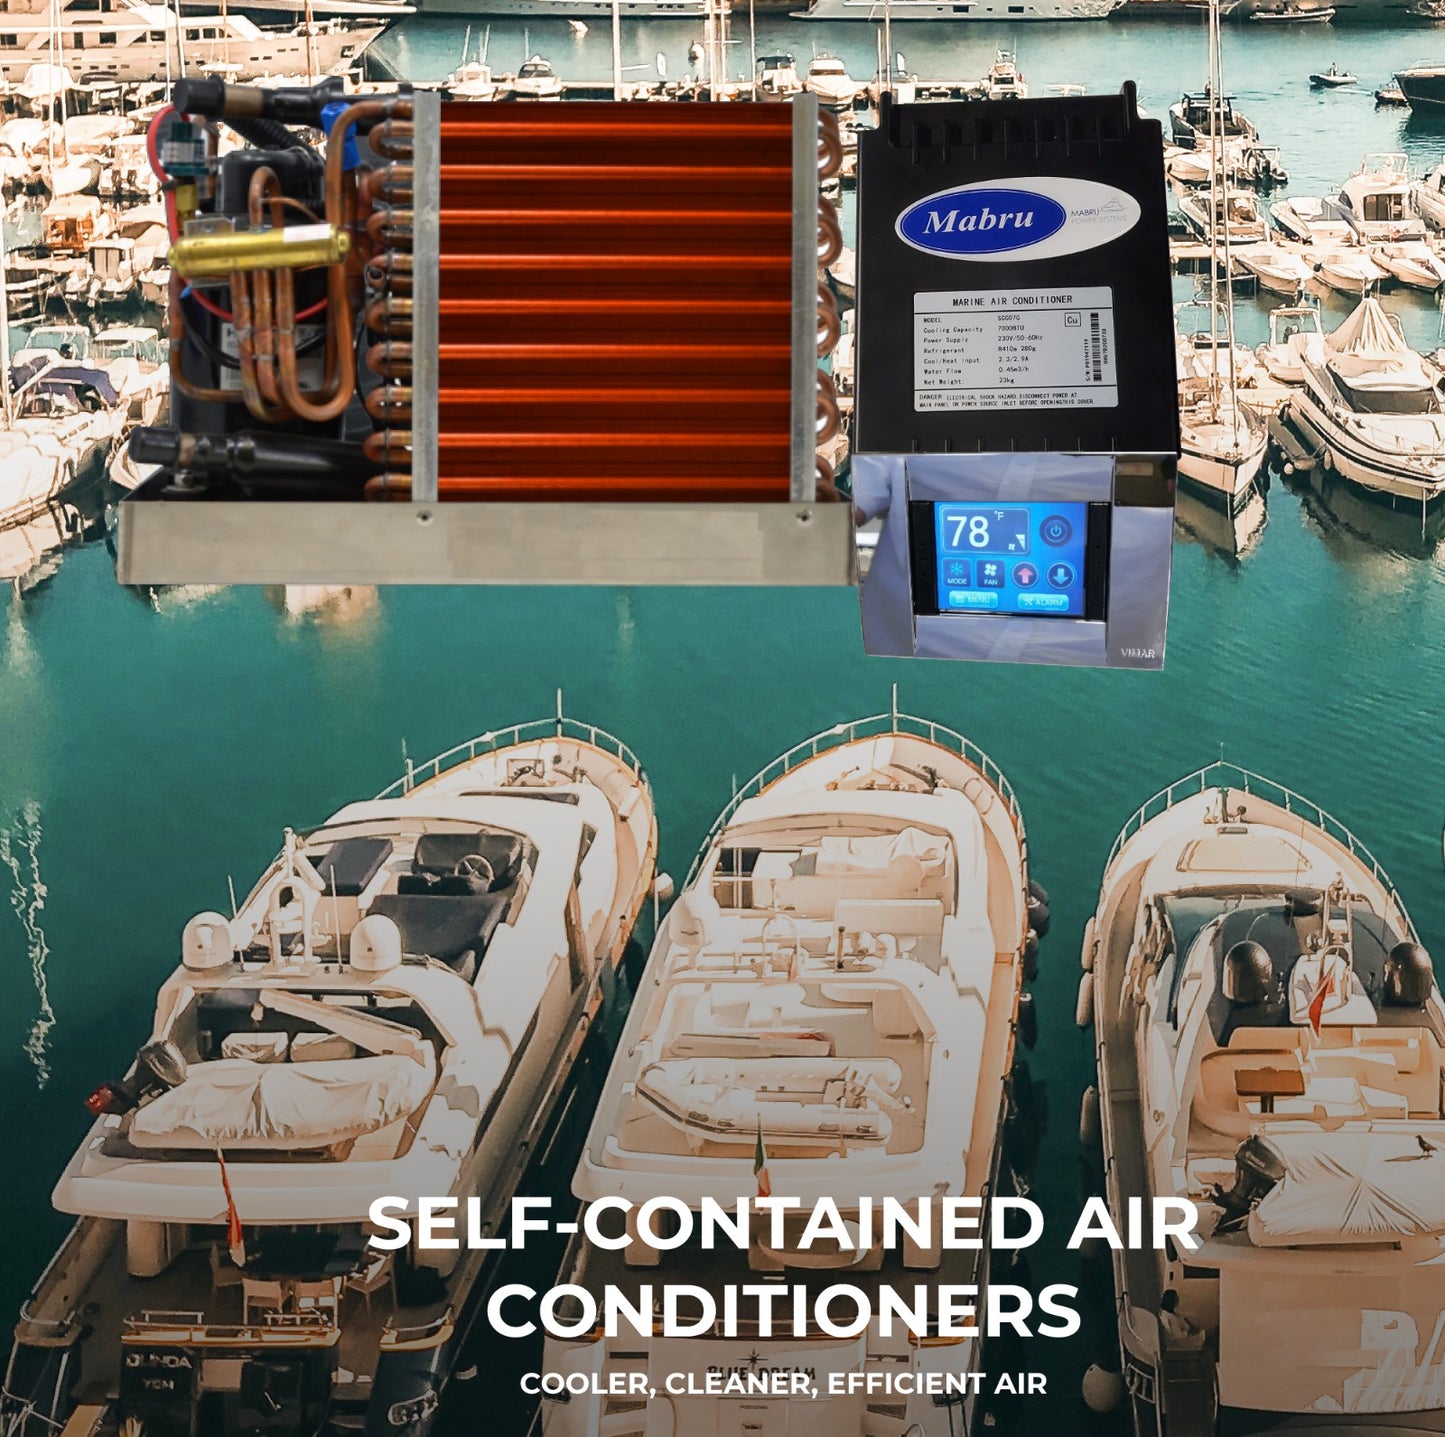 SELF-CONTAINED 17000 BTU 115V 50/60HZ MARINE AIR CONDITIONER COPPER FIN (HEATING AND COOLING) by MABRU